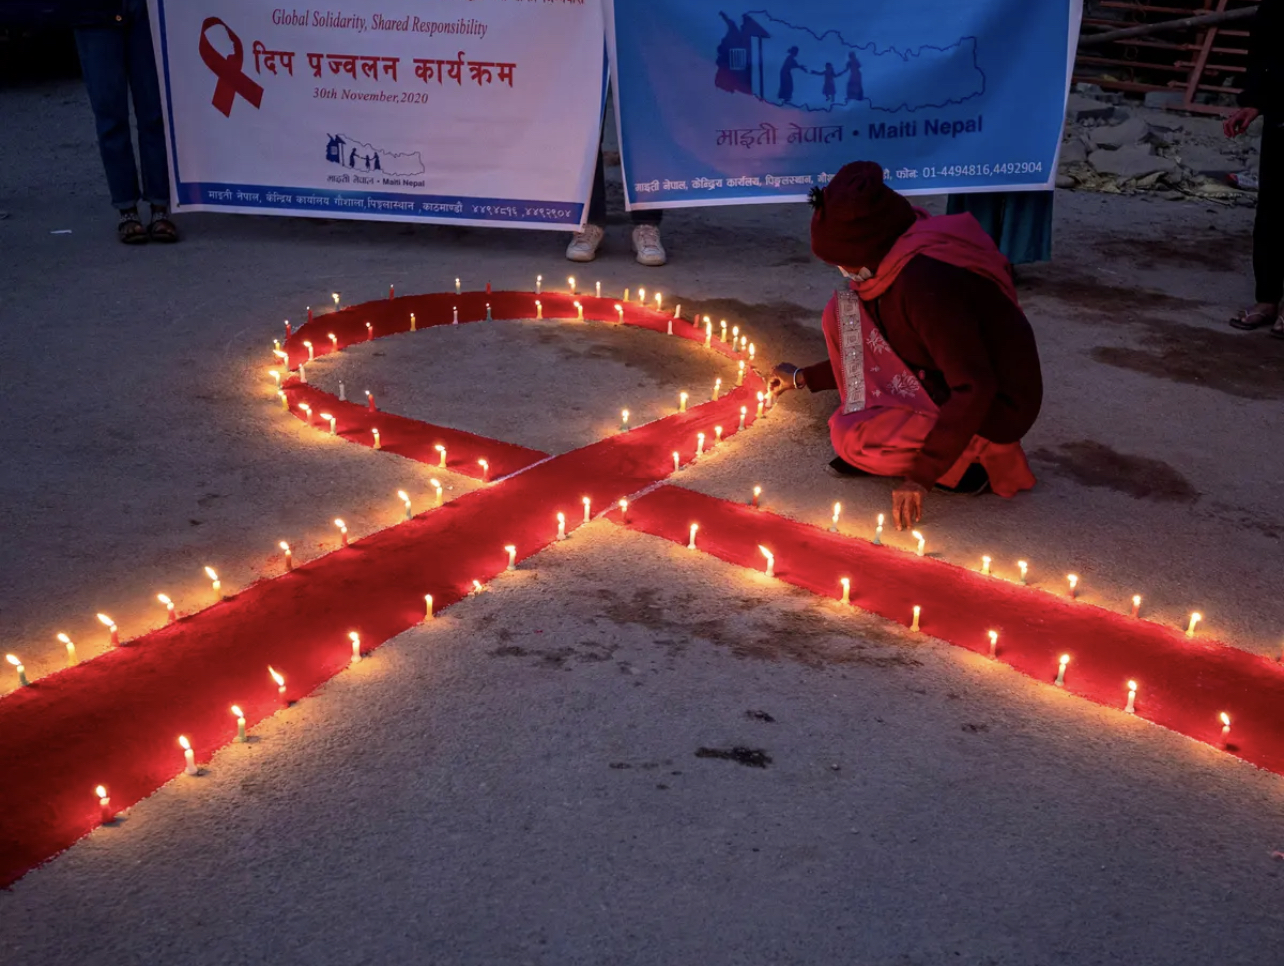 New HIV infections fell by 84 percent in the past two decades in Nepal